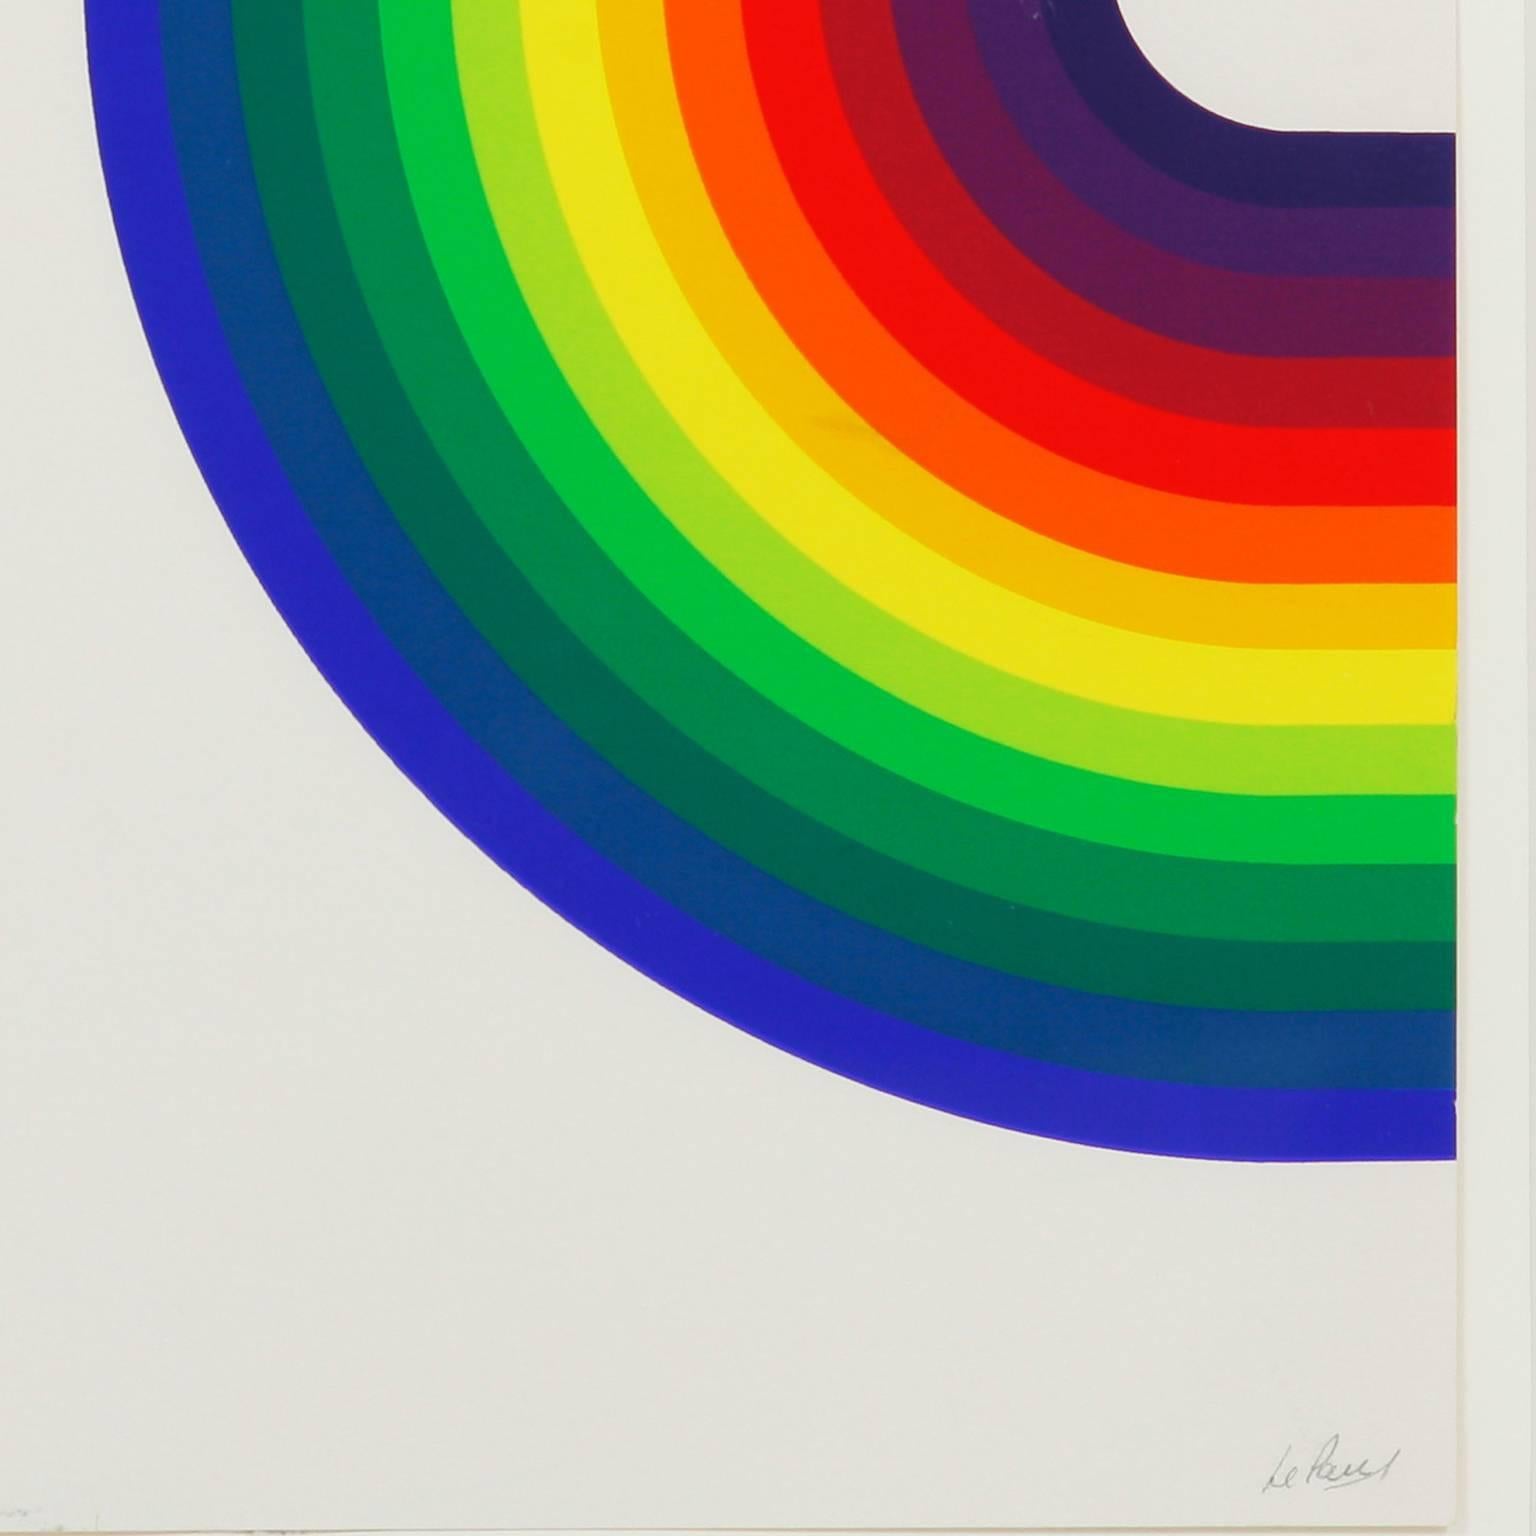 Mid-Century Modern Julio Le Parc Original Screen Print Hand Signed Numbered 85/100